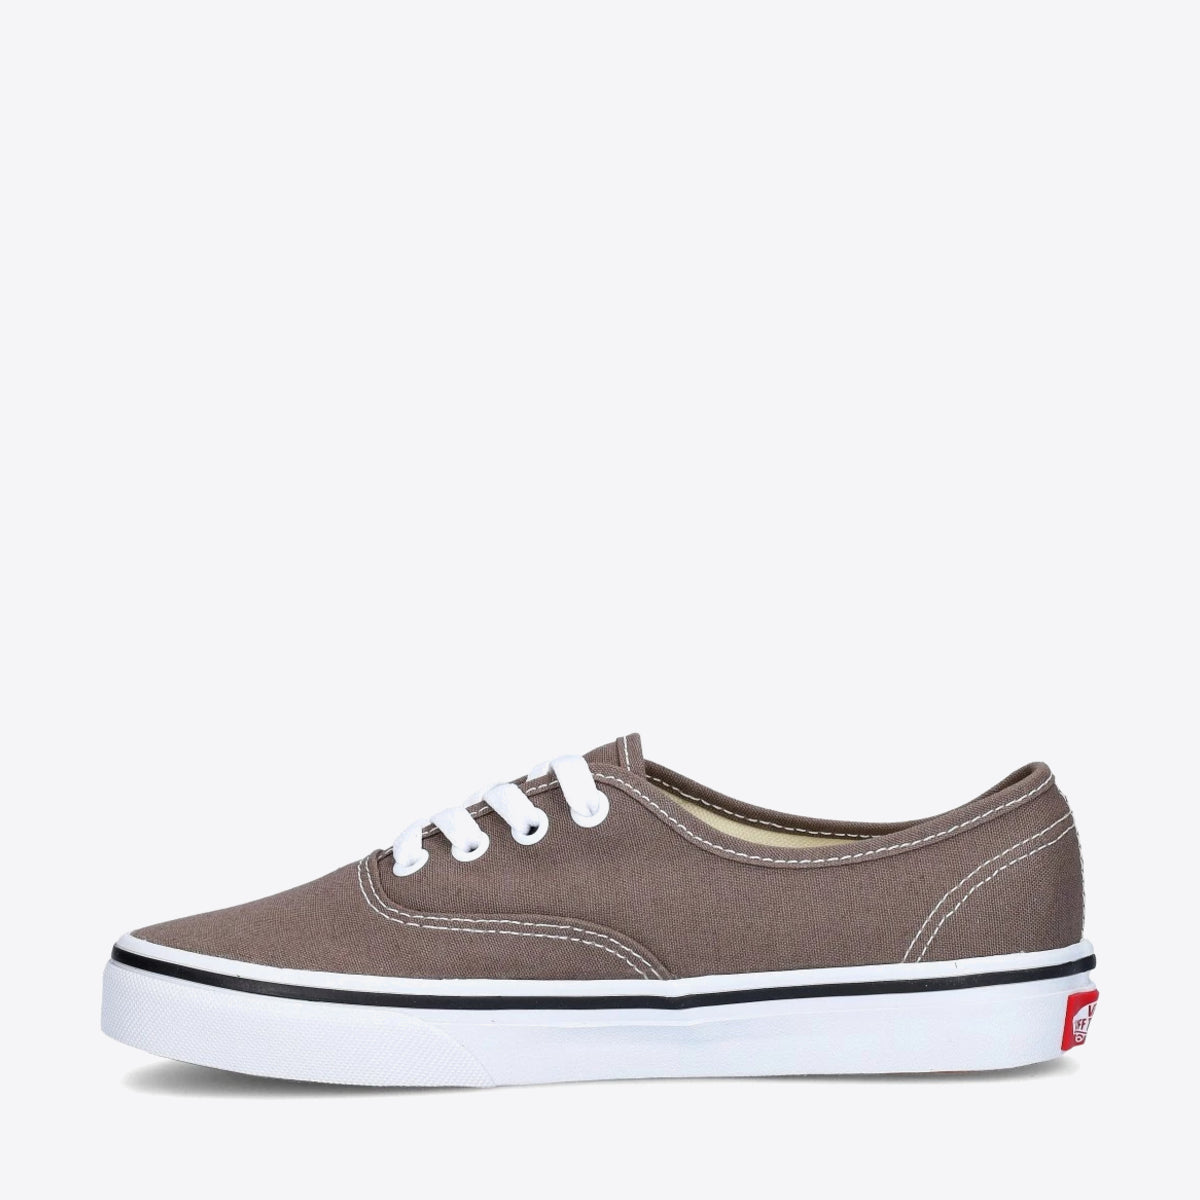 VANS Authentic Colour Theory Bungee Cord - Image 7